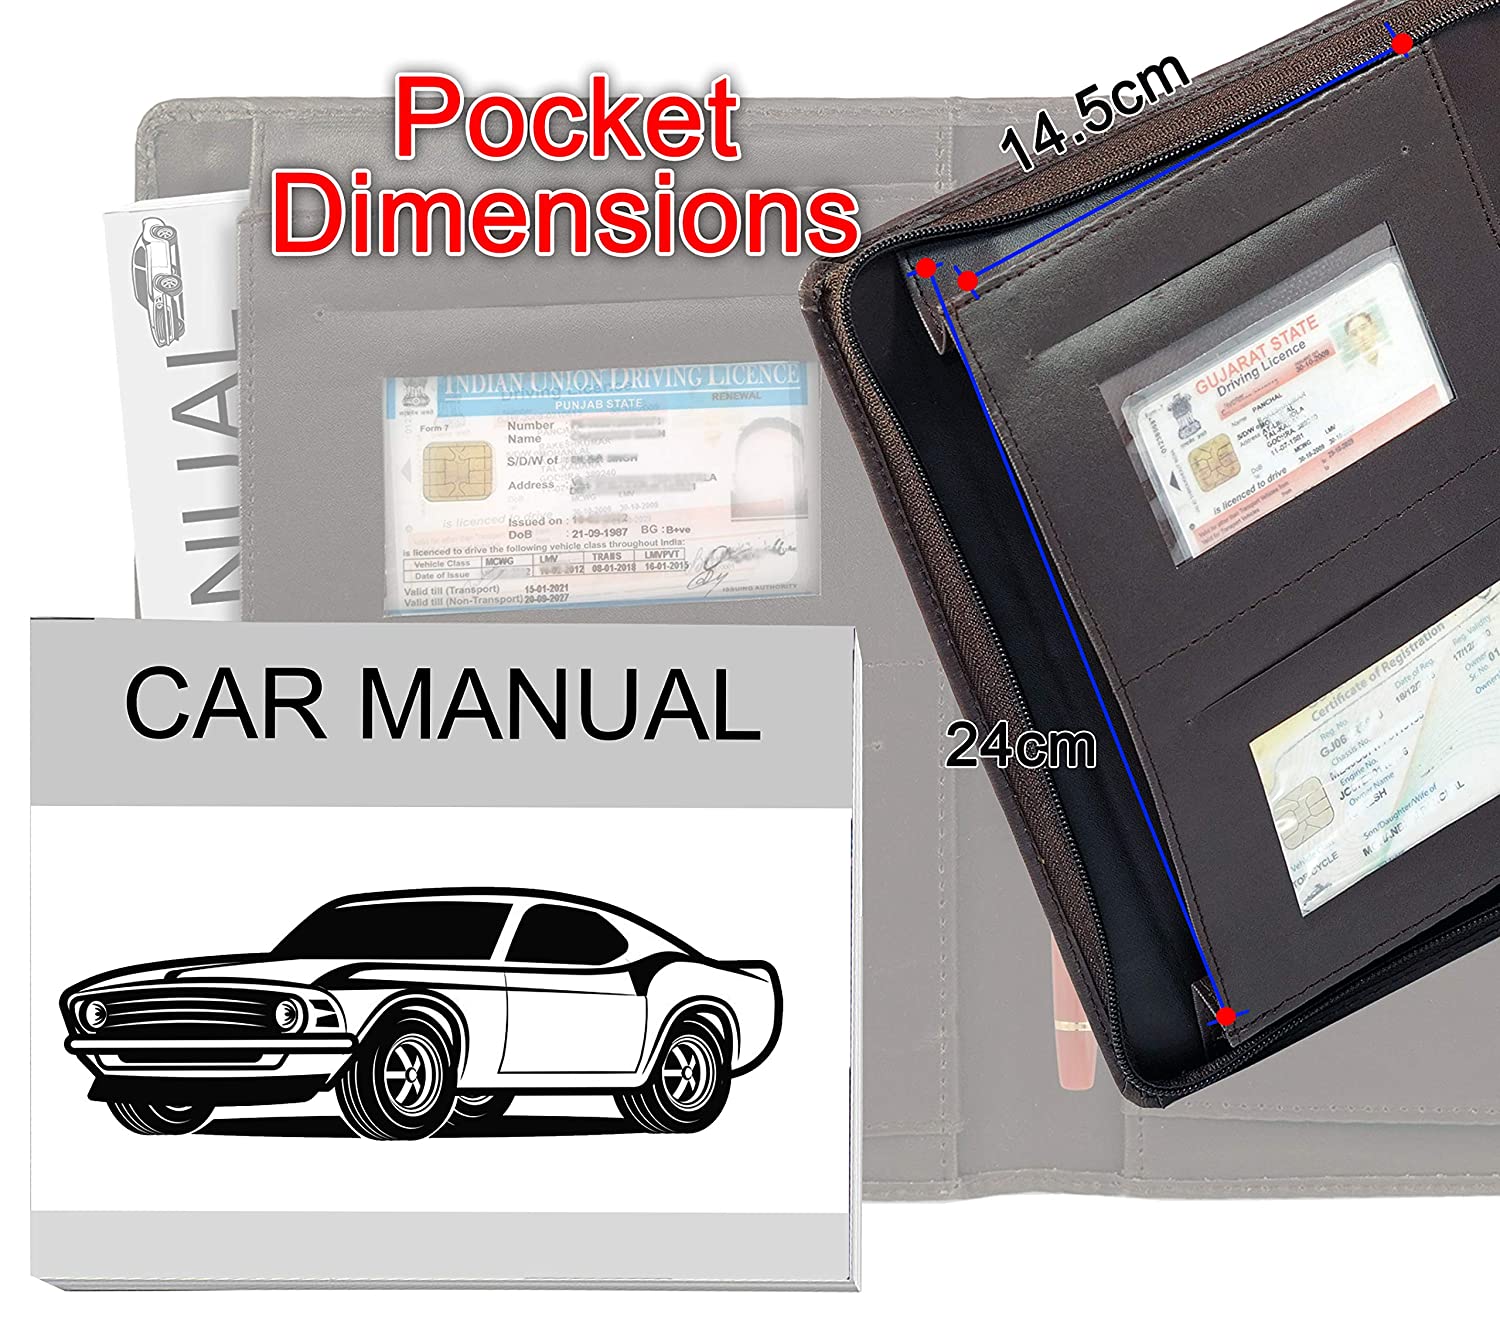 Canvas kwmobile Registration and Insurance Holder Car Document Holder for Vehicle Documents and Cards Grey/Black 